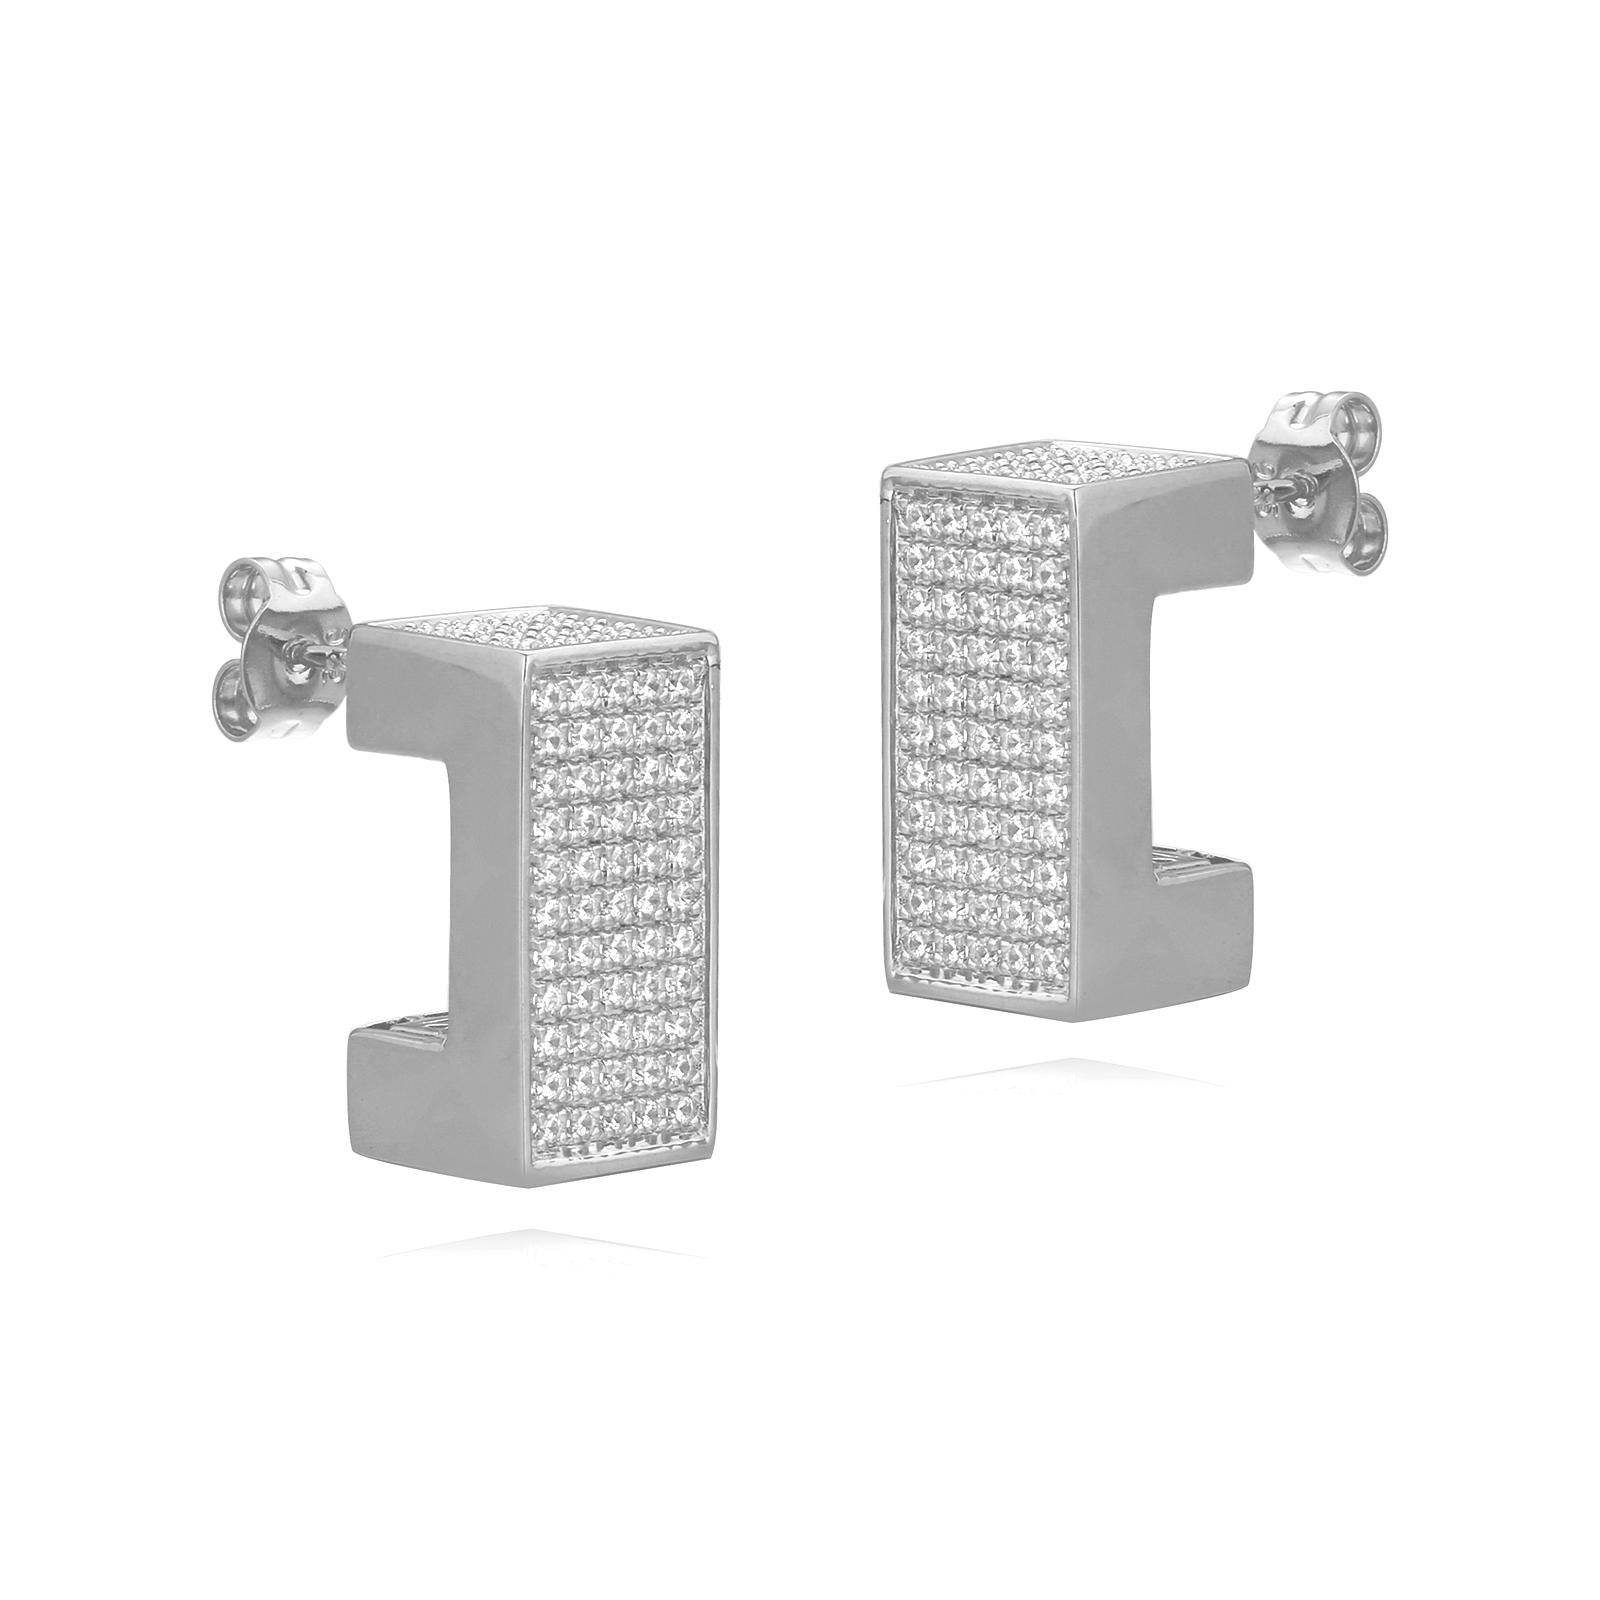 We are fierce and bold. These 3D square pave earrings are the perfect complement to your look, day or night . The 3D effect lets your edginess and resiliency stand out in the crowd, and bling more vibrantly with white topaz semiprecious gemstones.